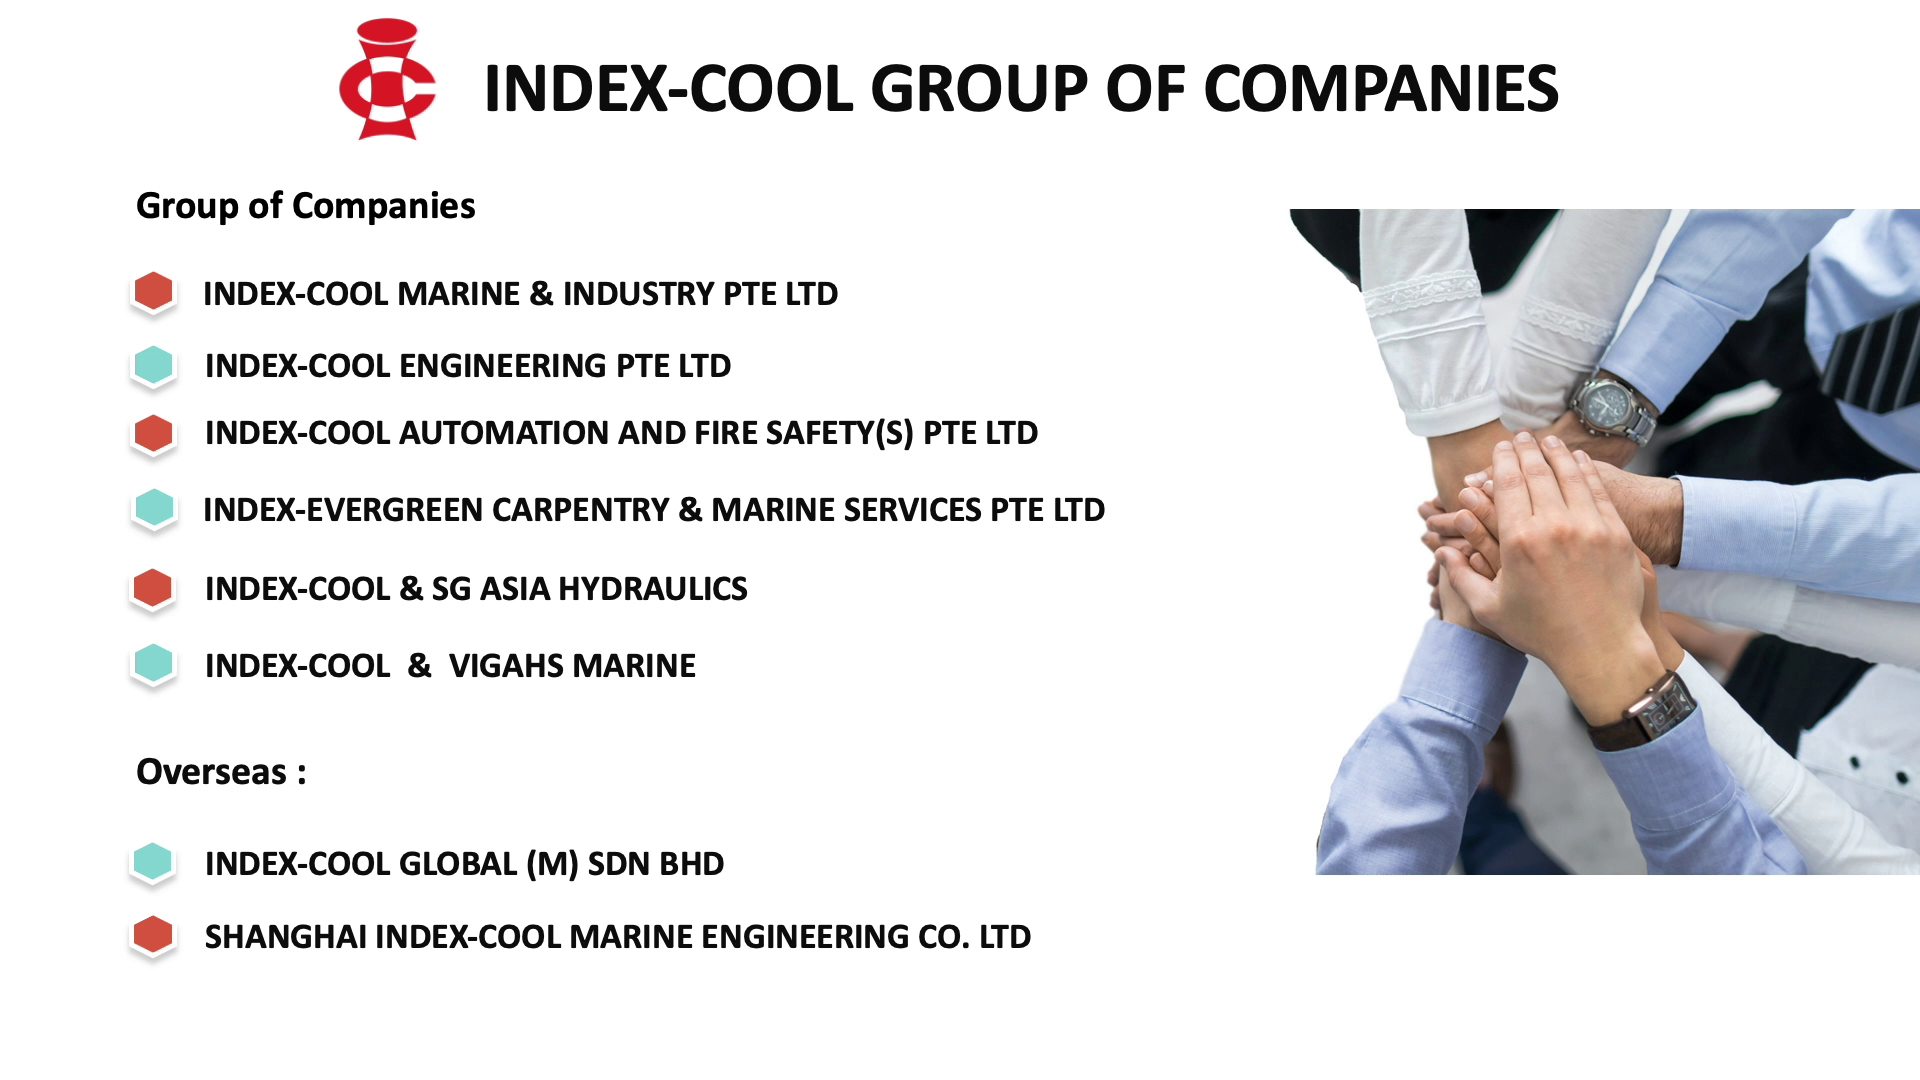 INDEX-COOL GROUP OF COMPANIES